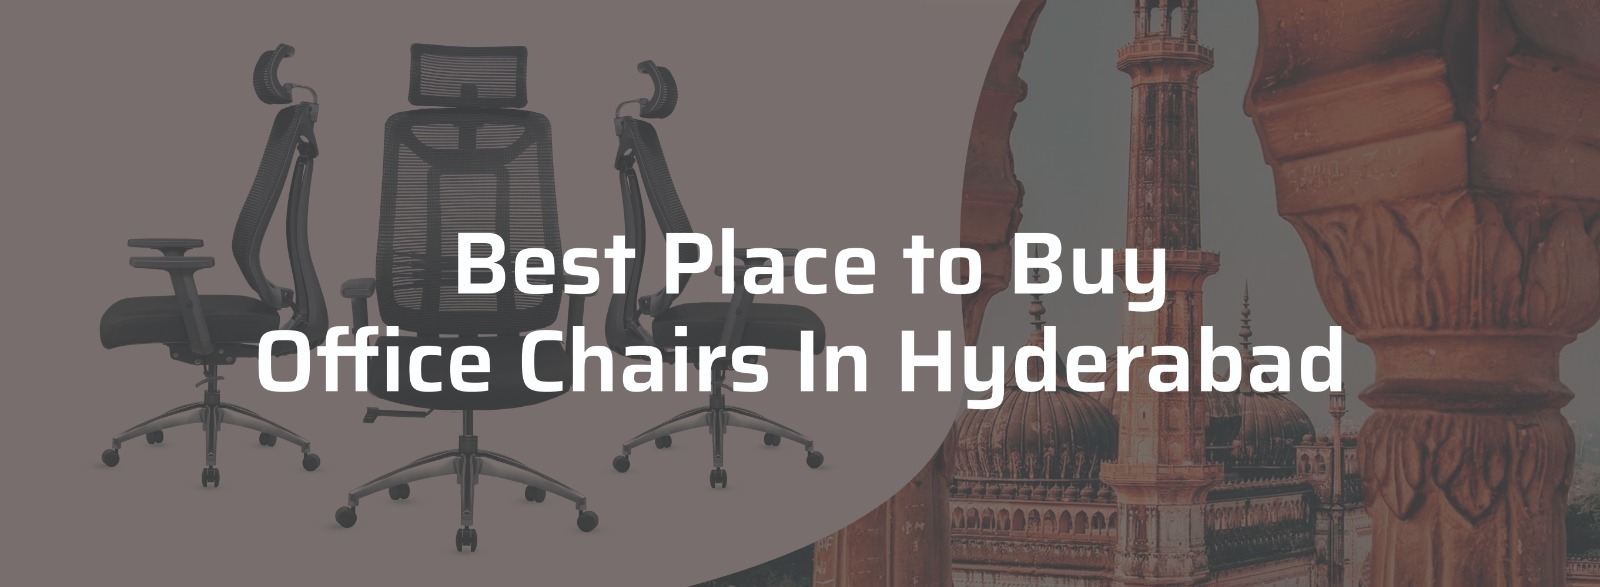 office chairs in hyderabad